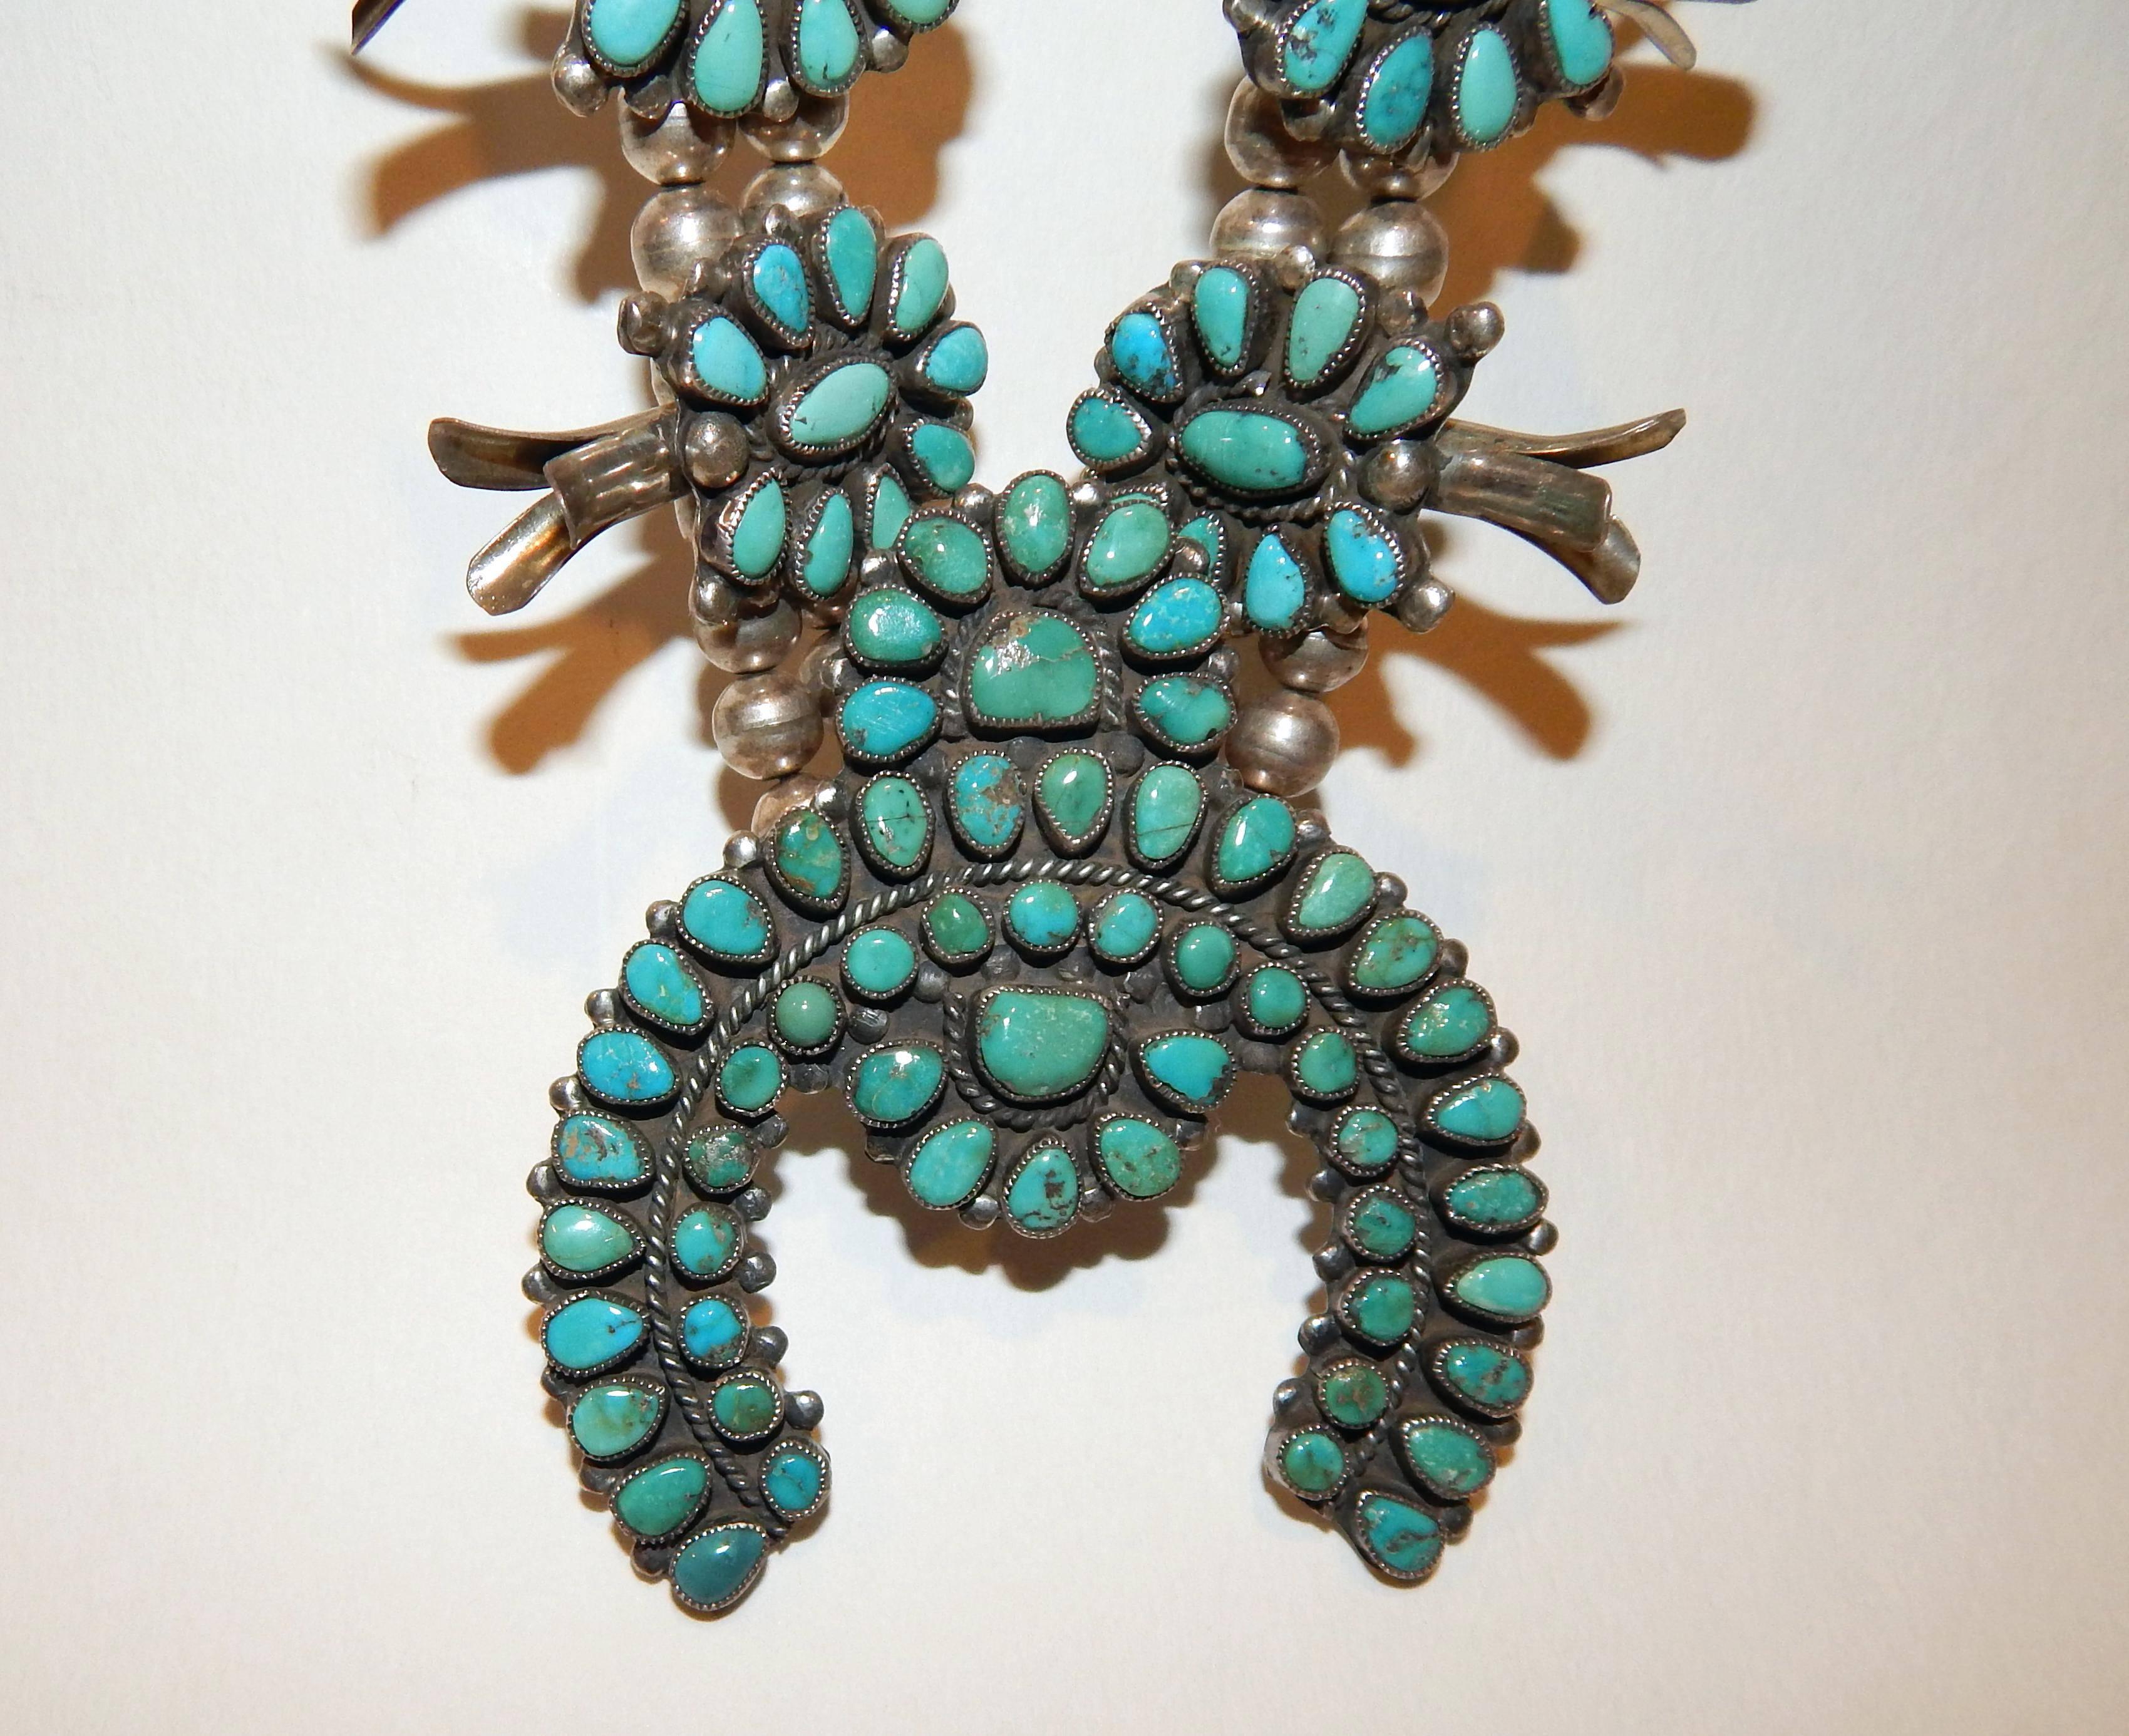 Beautiful Zuni Native American squash blossom necklace.
Sterling and American Turquoise.
29